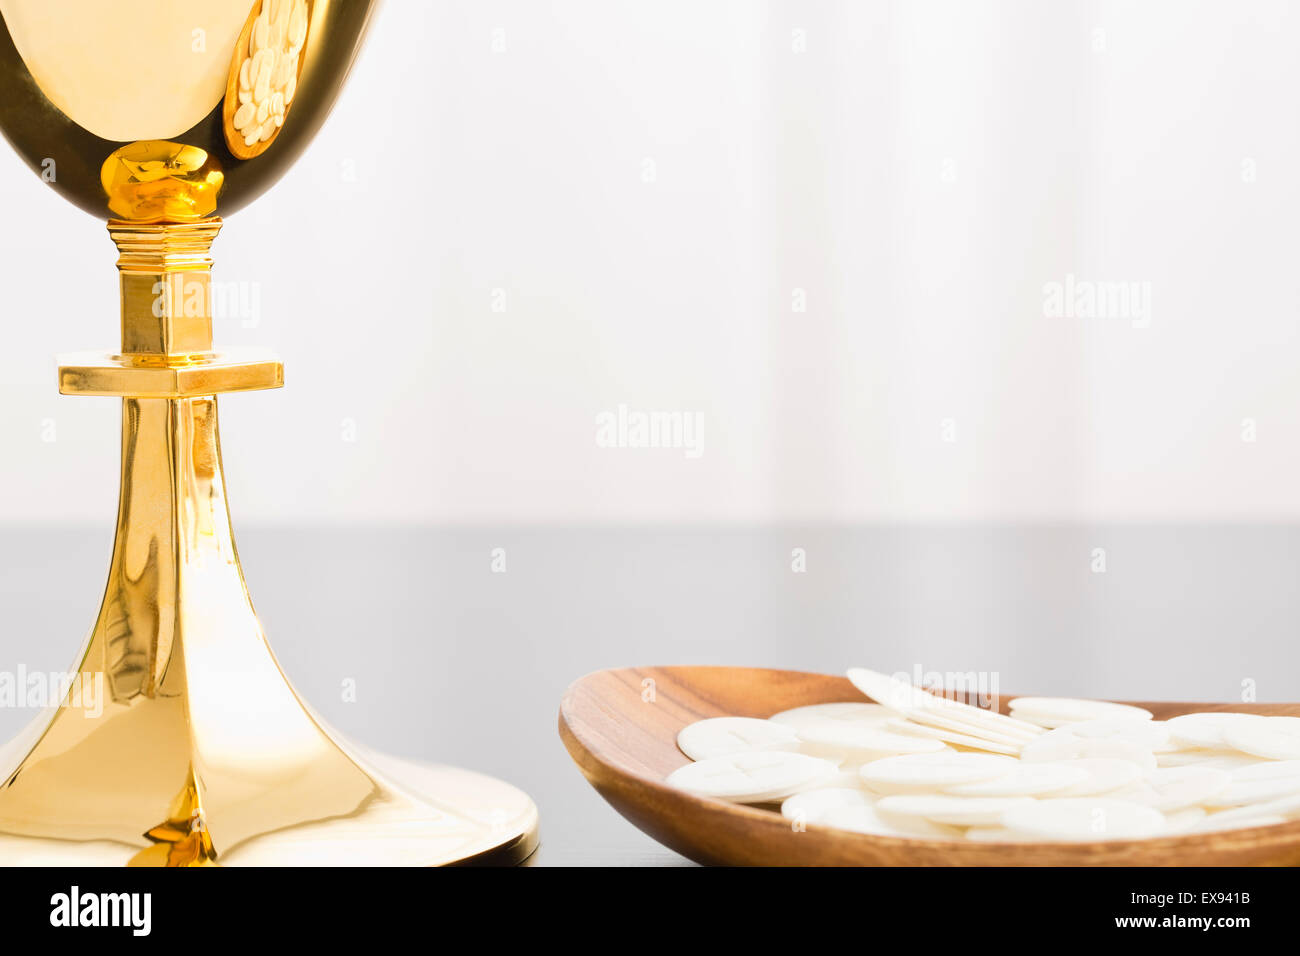 Christian holy communion, gold chalice and communion wafer on plate Stock Photo